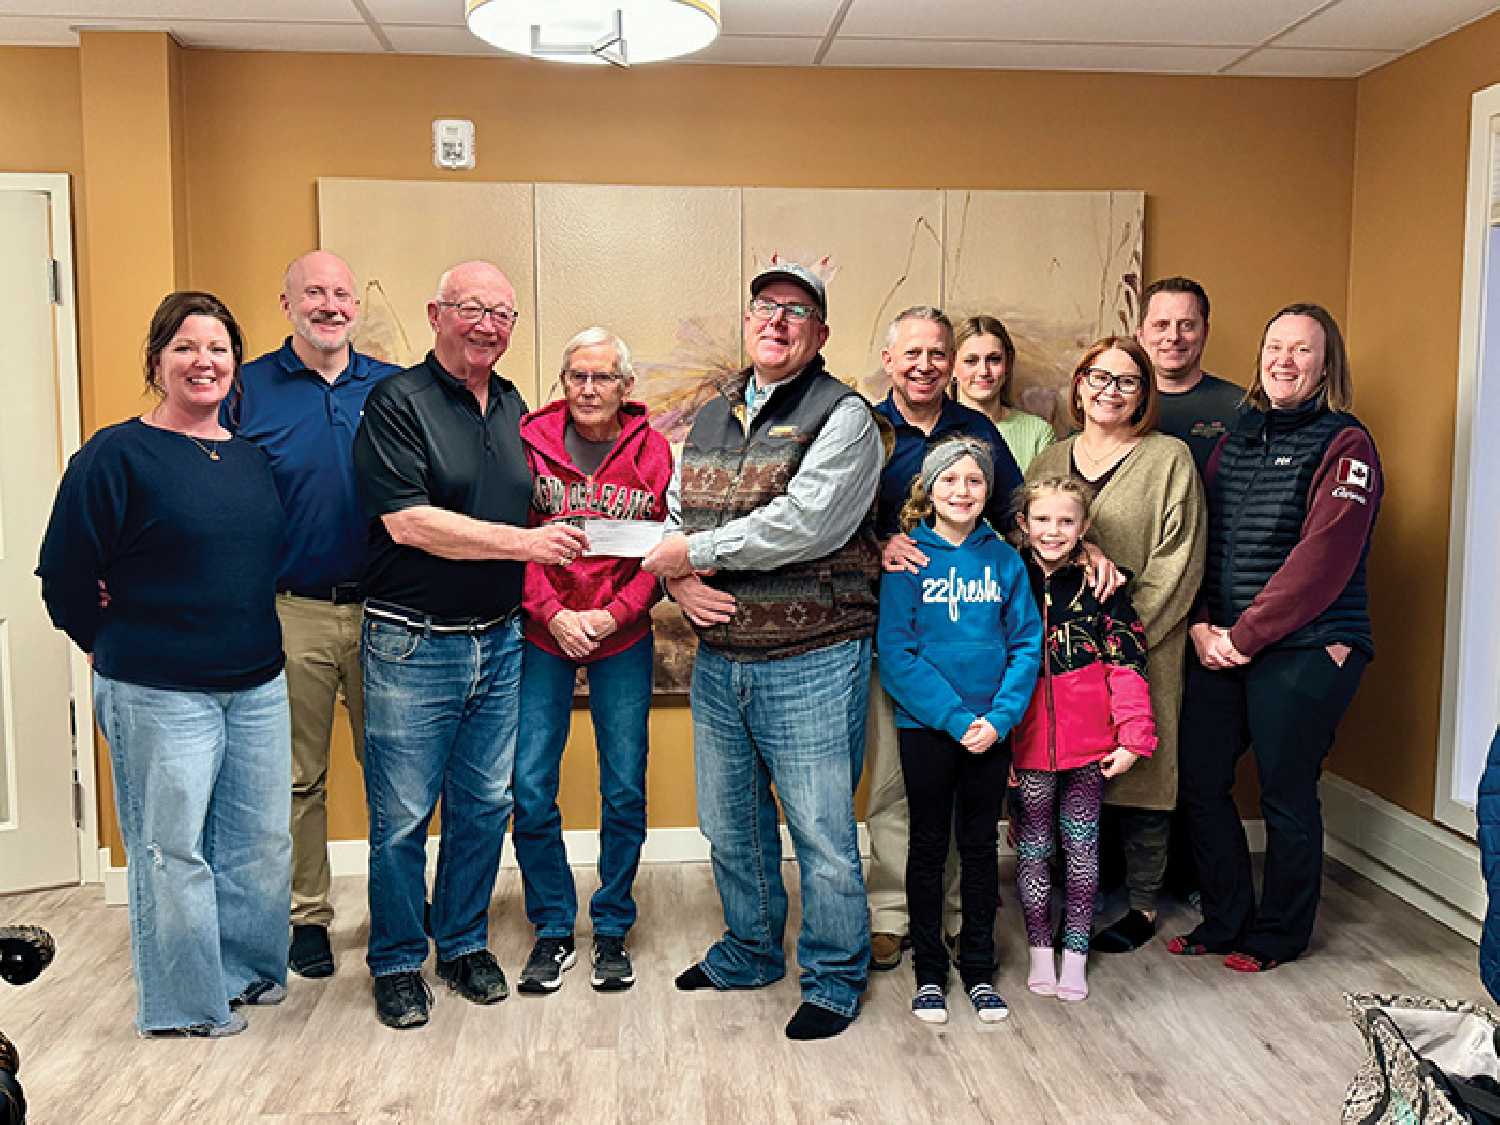 The Thorn family donated $50,000 last week to the Moosomin Airport Expansion Project. From left are Randi Thorn, Ryan Thorn, Bill Thorn, Phyllis Thorn, RM of Moosomin Reeve David Moffatt, Tyler Thorn with children Anika and Jessa, Ava Michael, Angela Thorn, Tyler Michael, and Gloria Thorn.